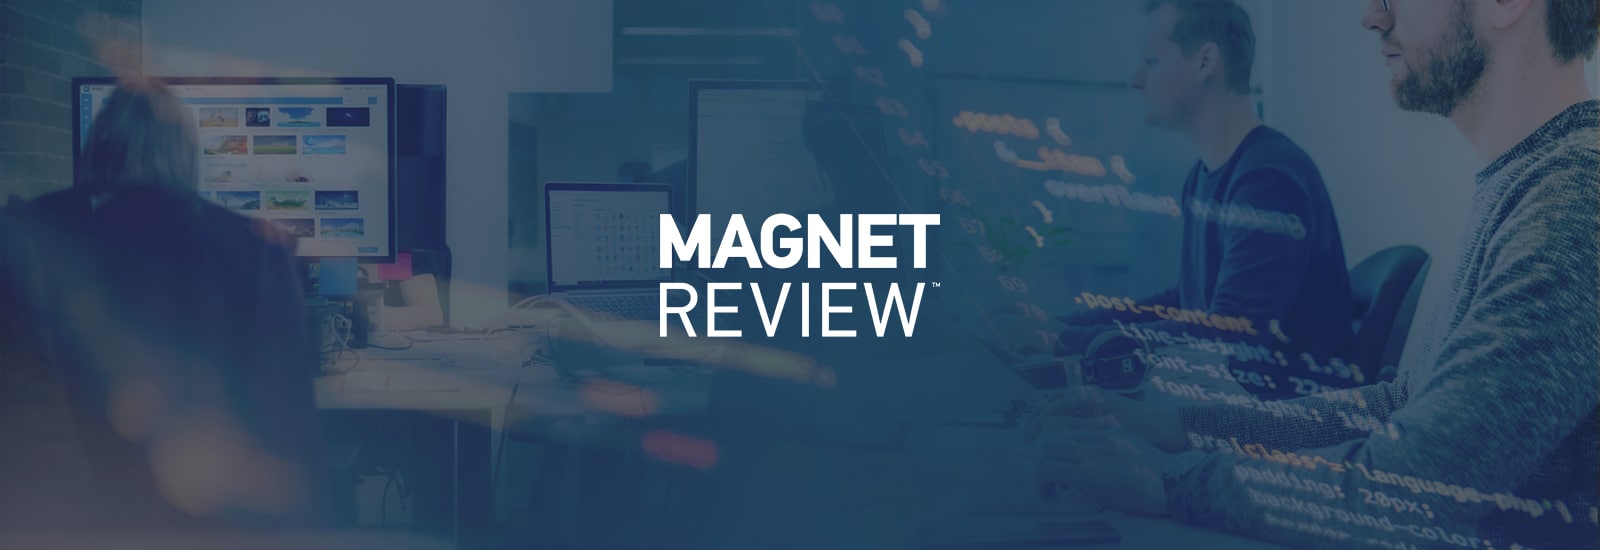 Magnet REVIEW